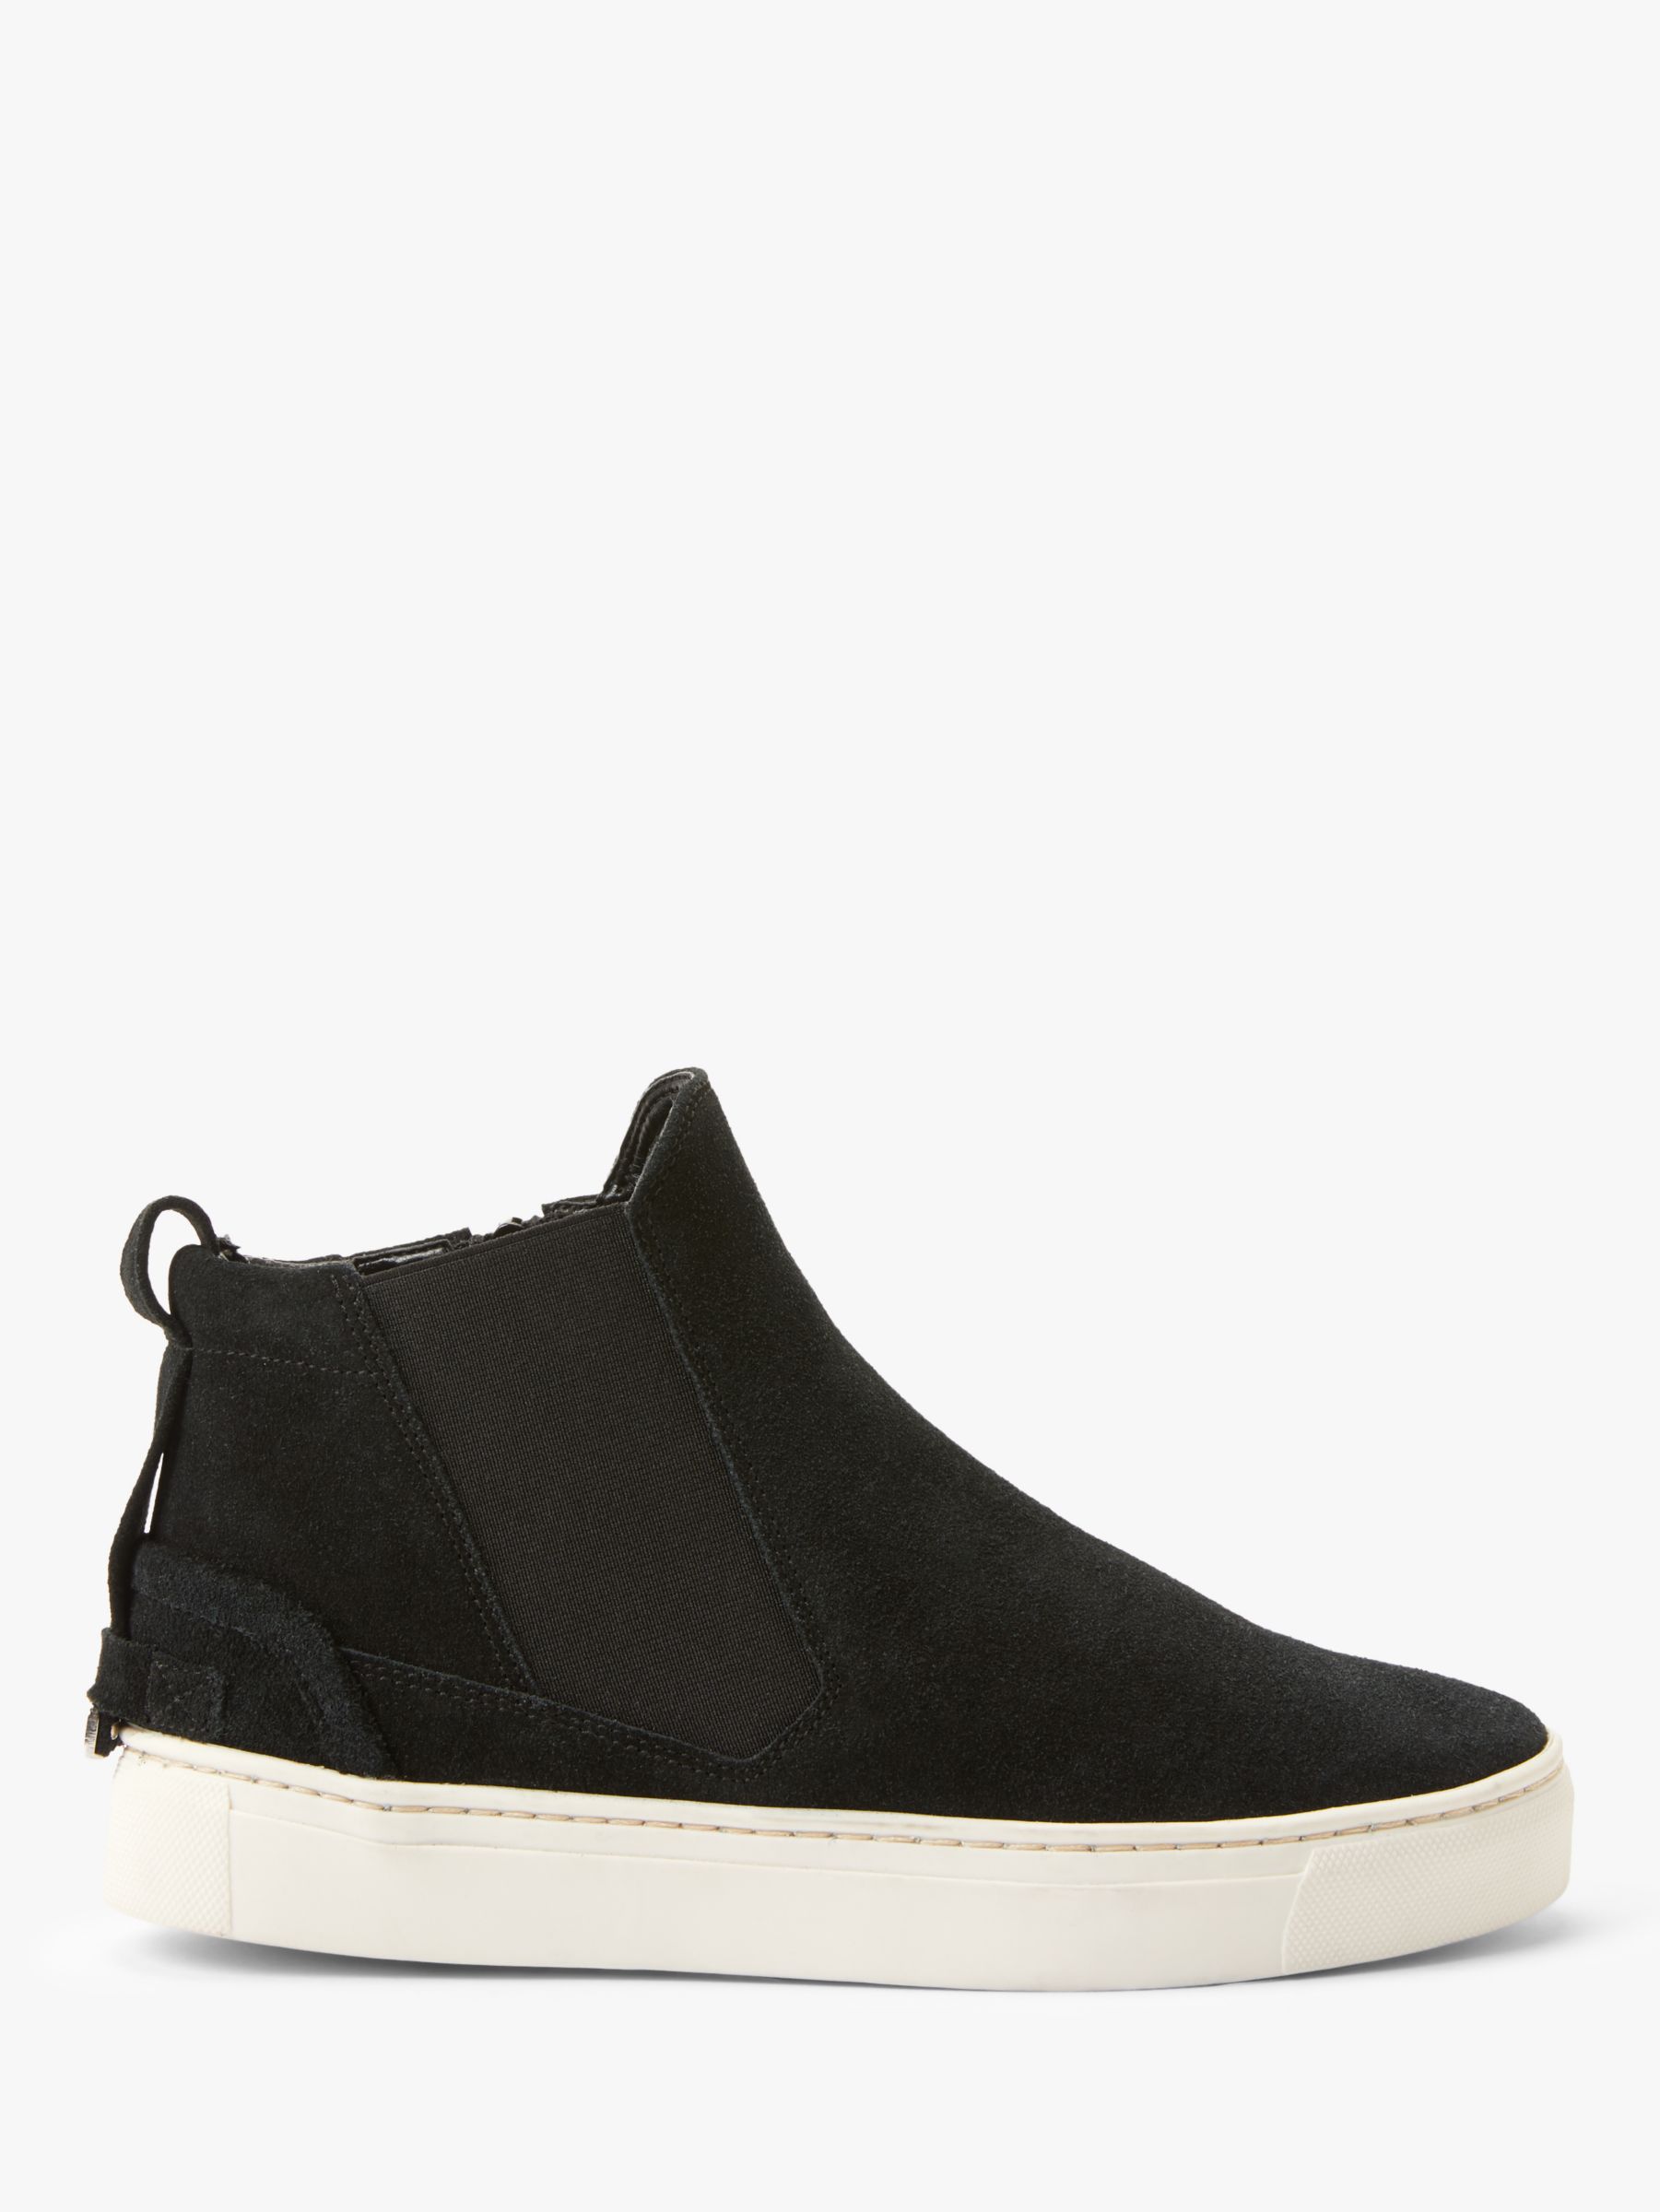 black trainer boots womens